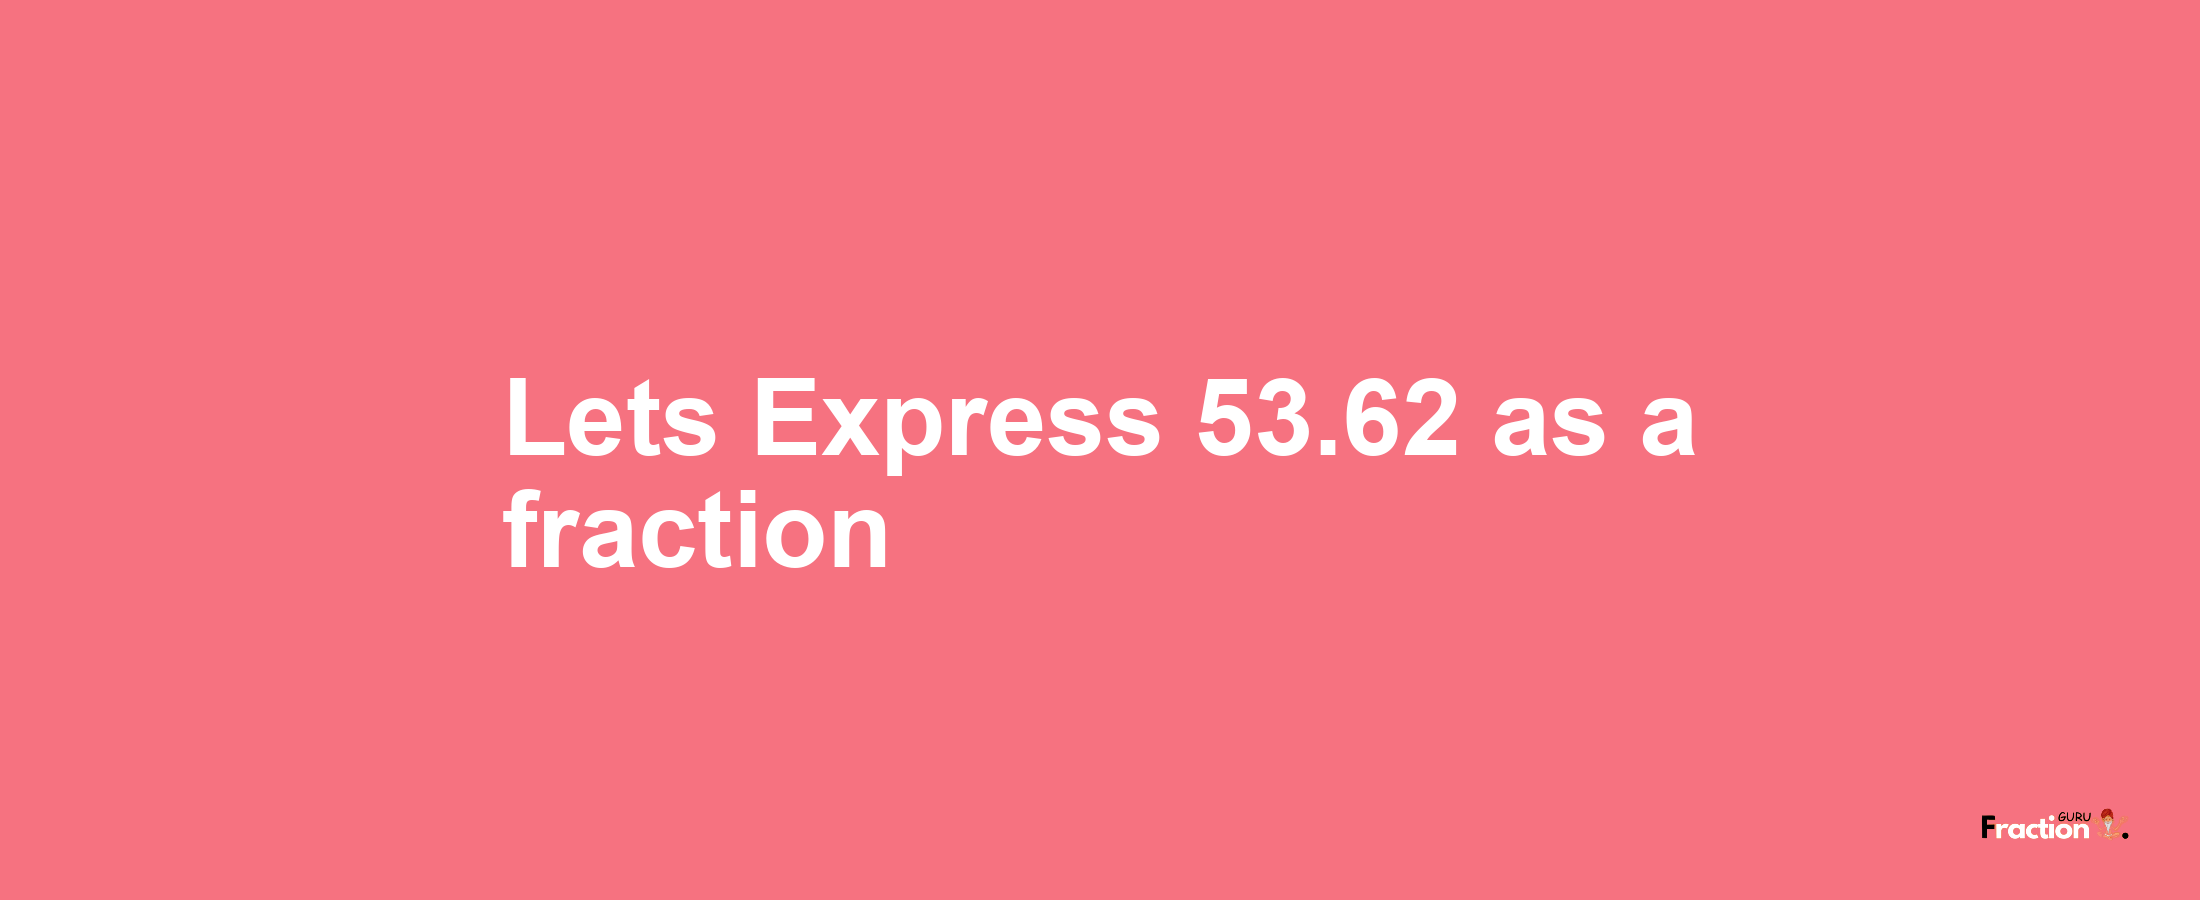 Lets Express 53.62 as afraction